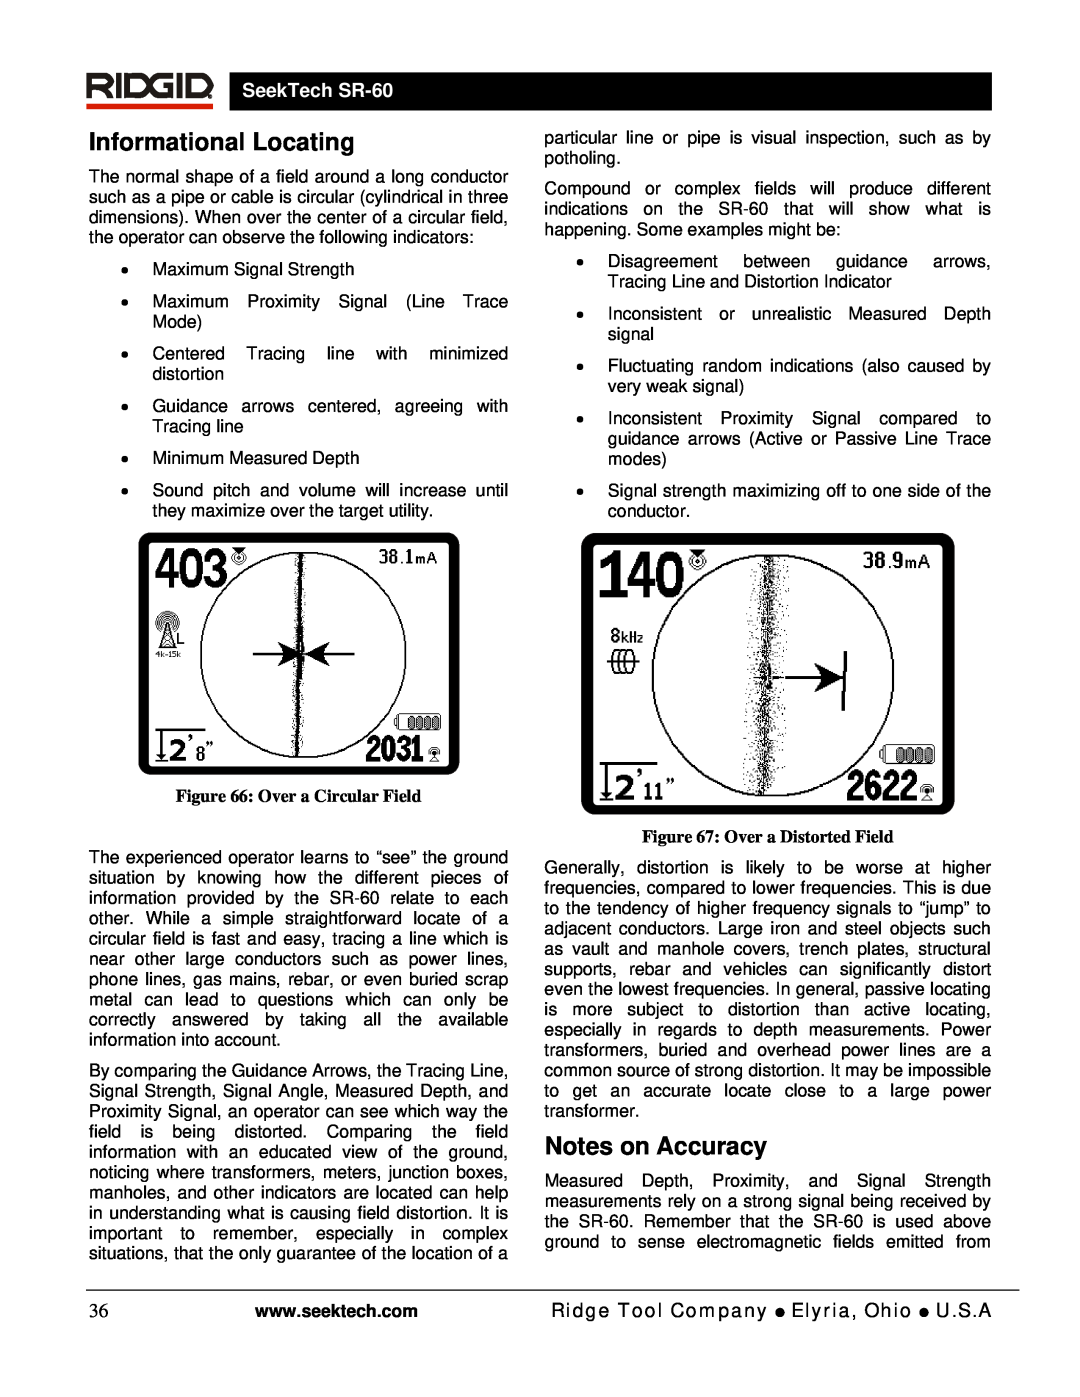 RIDGID manual Informational Locating, Notes on Accuracy, Over a Circular Field, Over a Distorted Field, SeekTech SR-60 